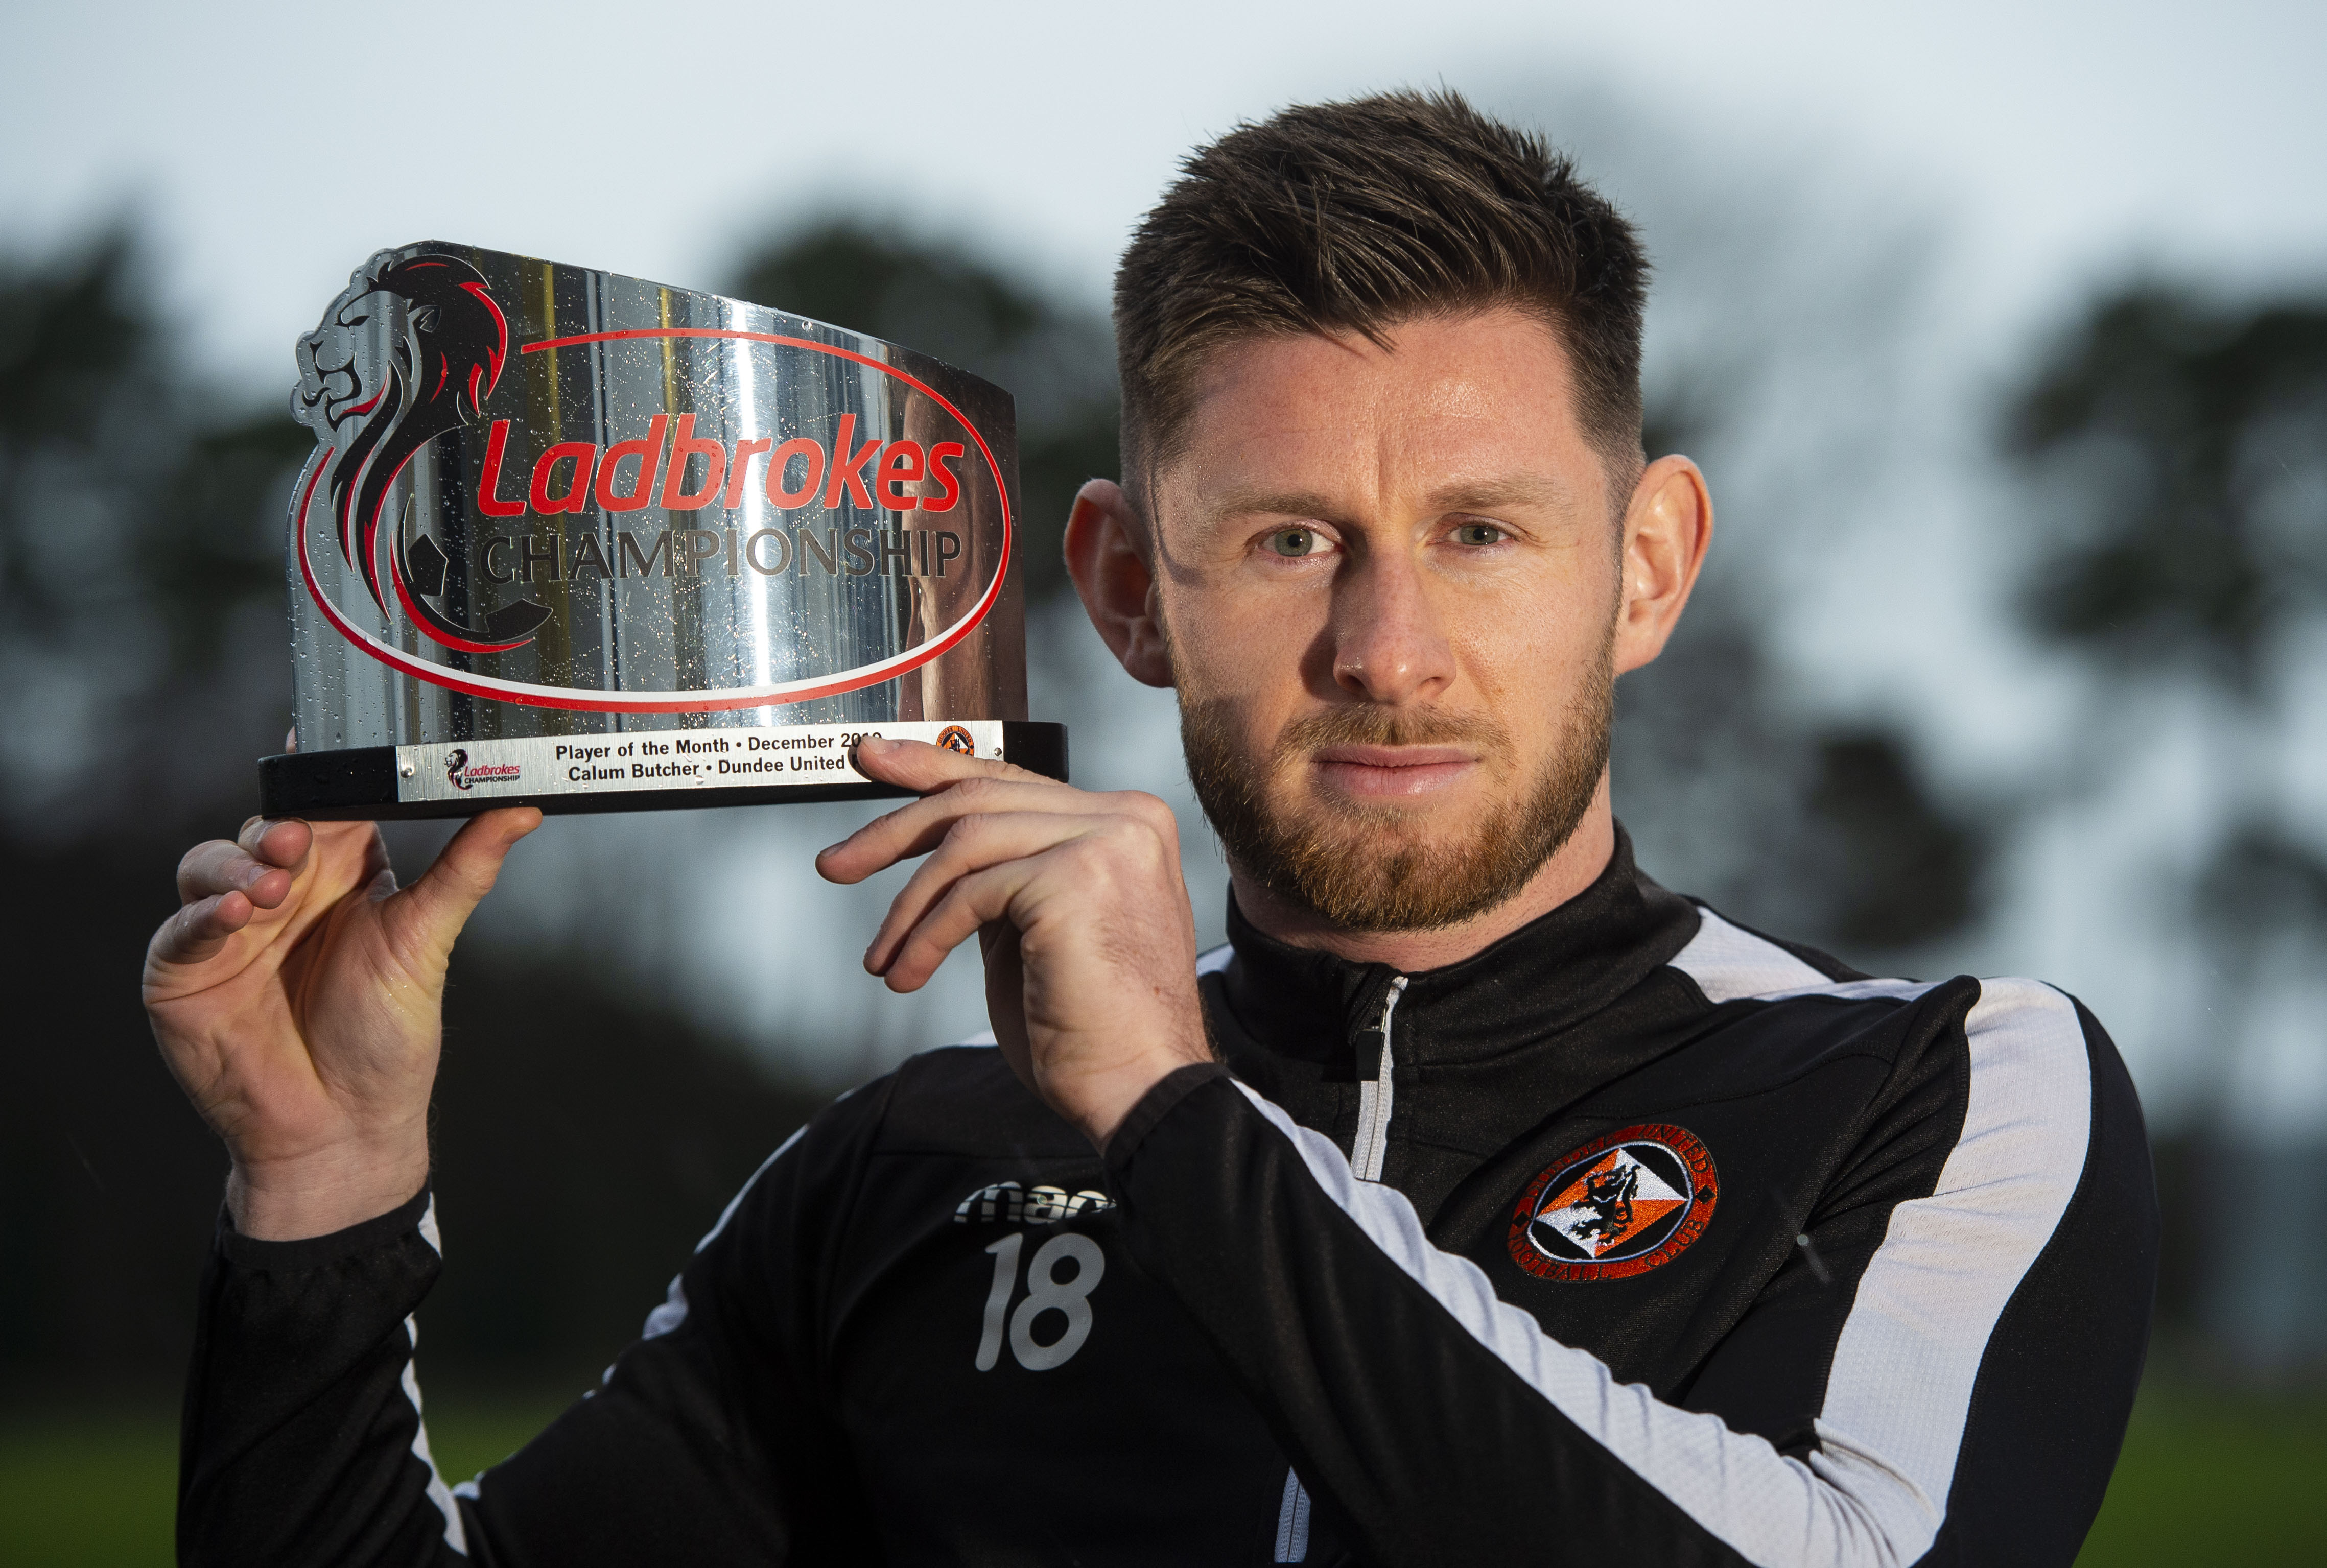 Calum Butcher with his player of the month award.